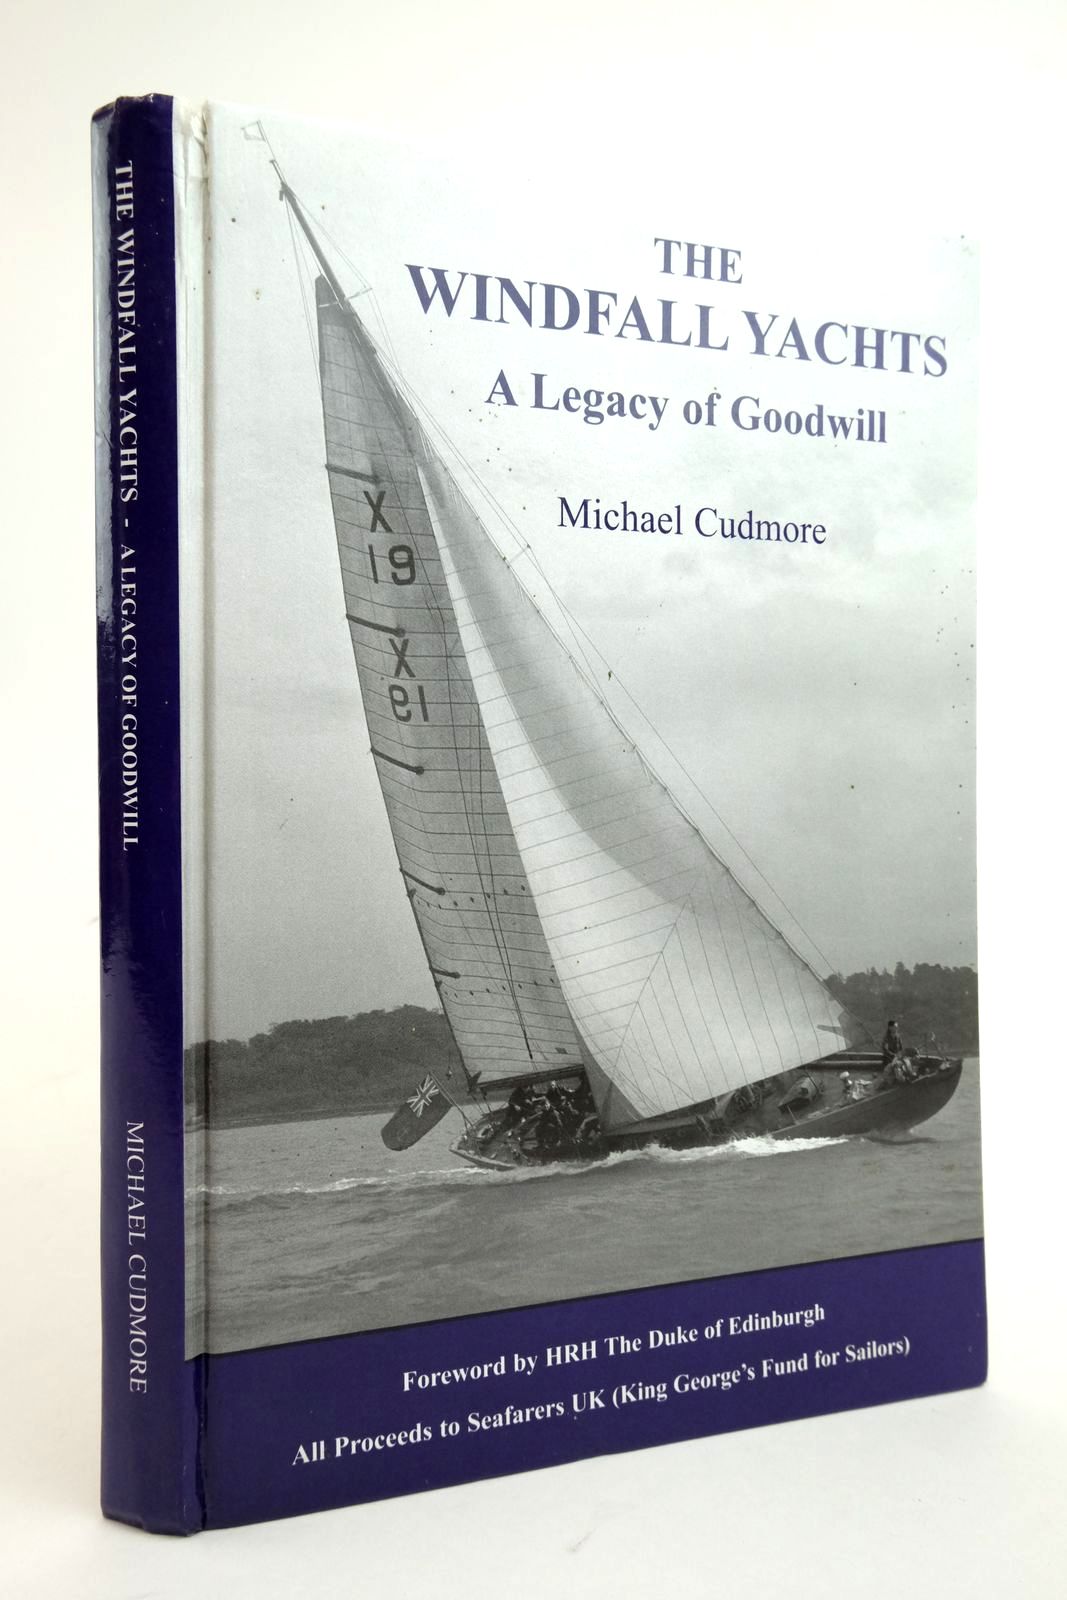 the windfall yachts a legacy of goodwill